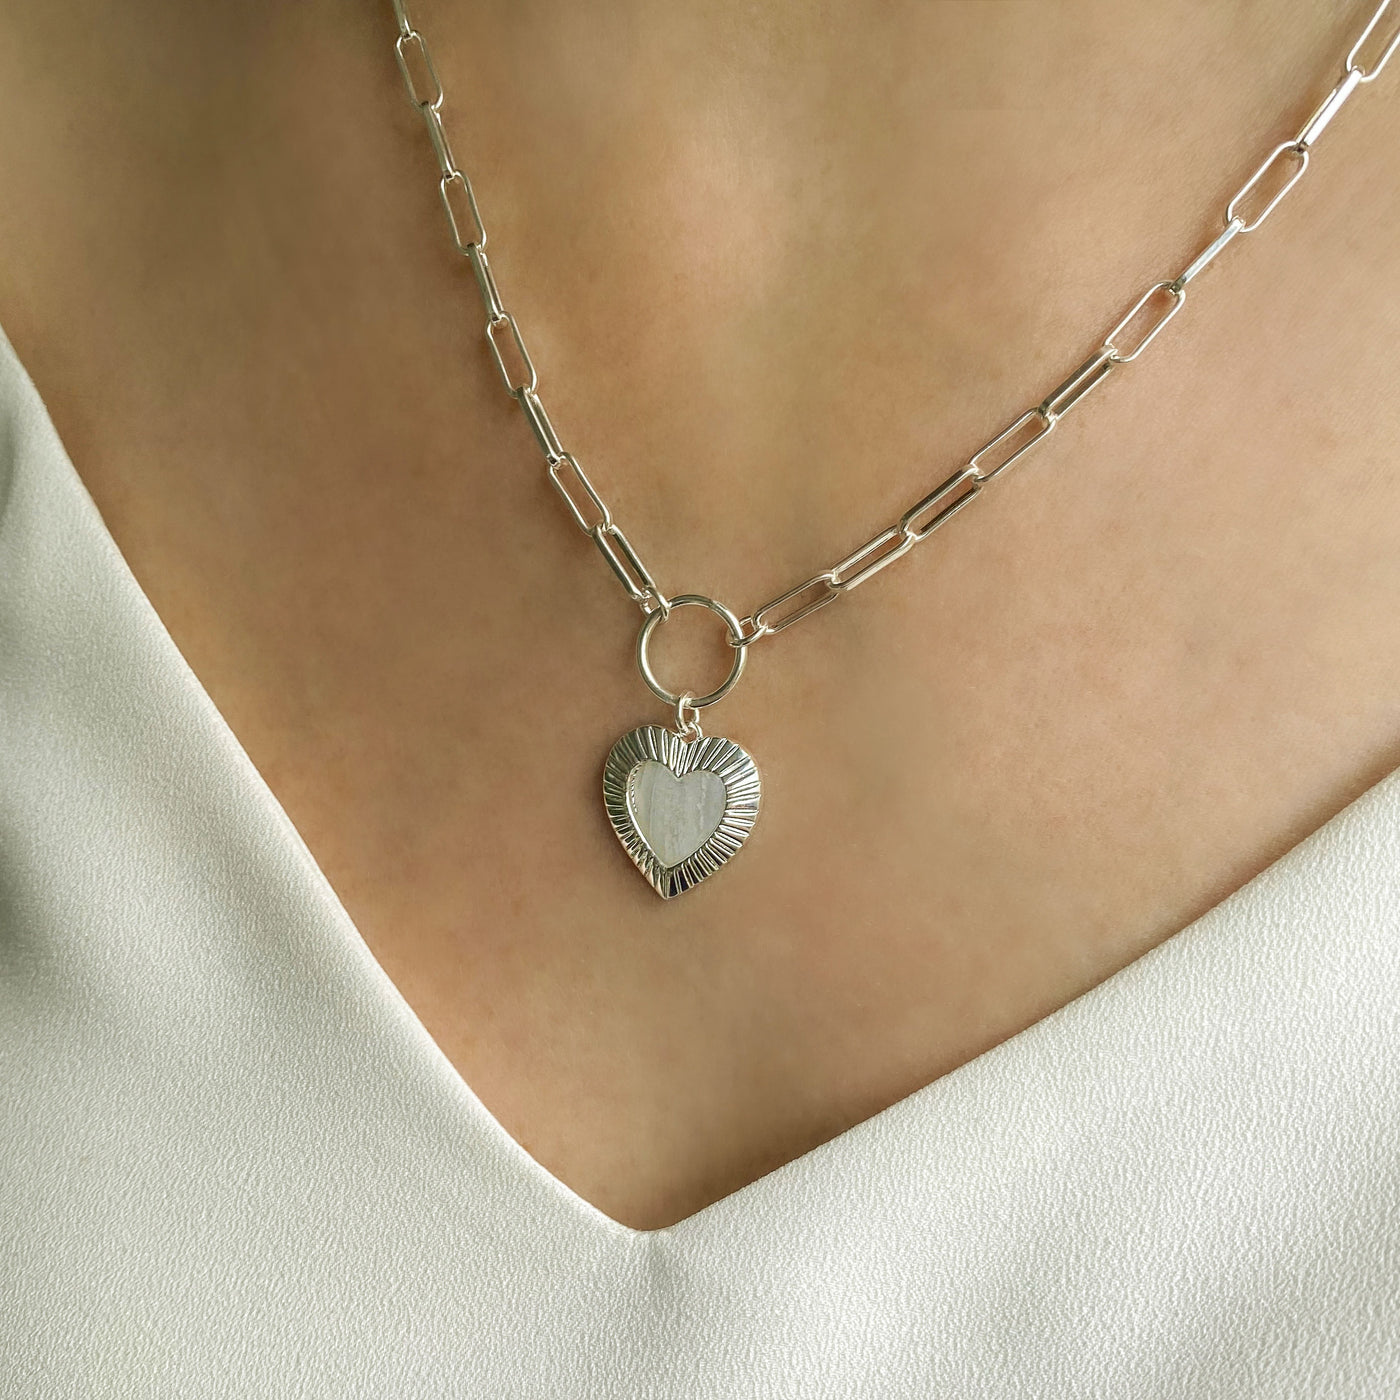 Silver chunky chain necklace with blue lace agate heart charm